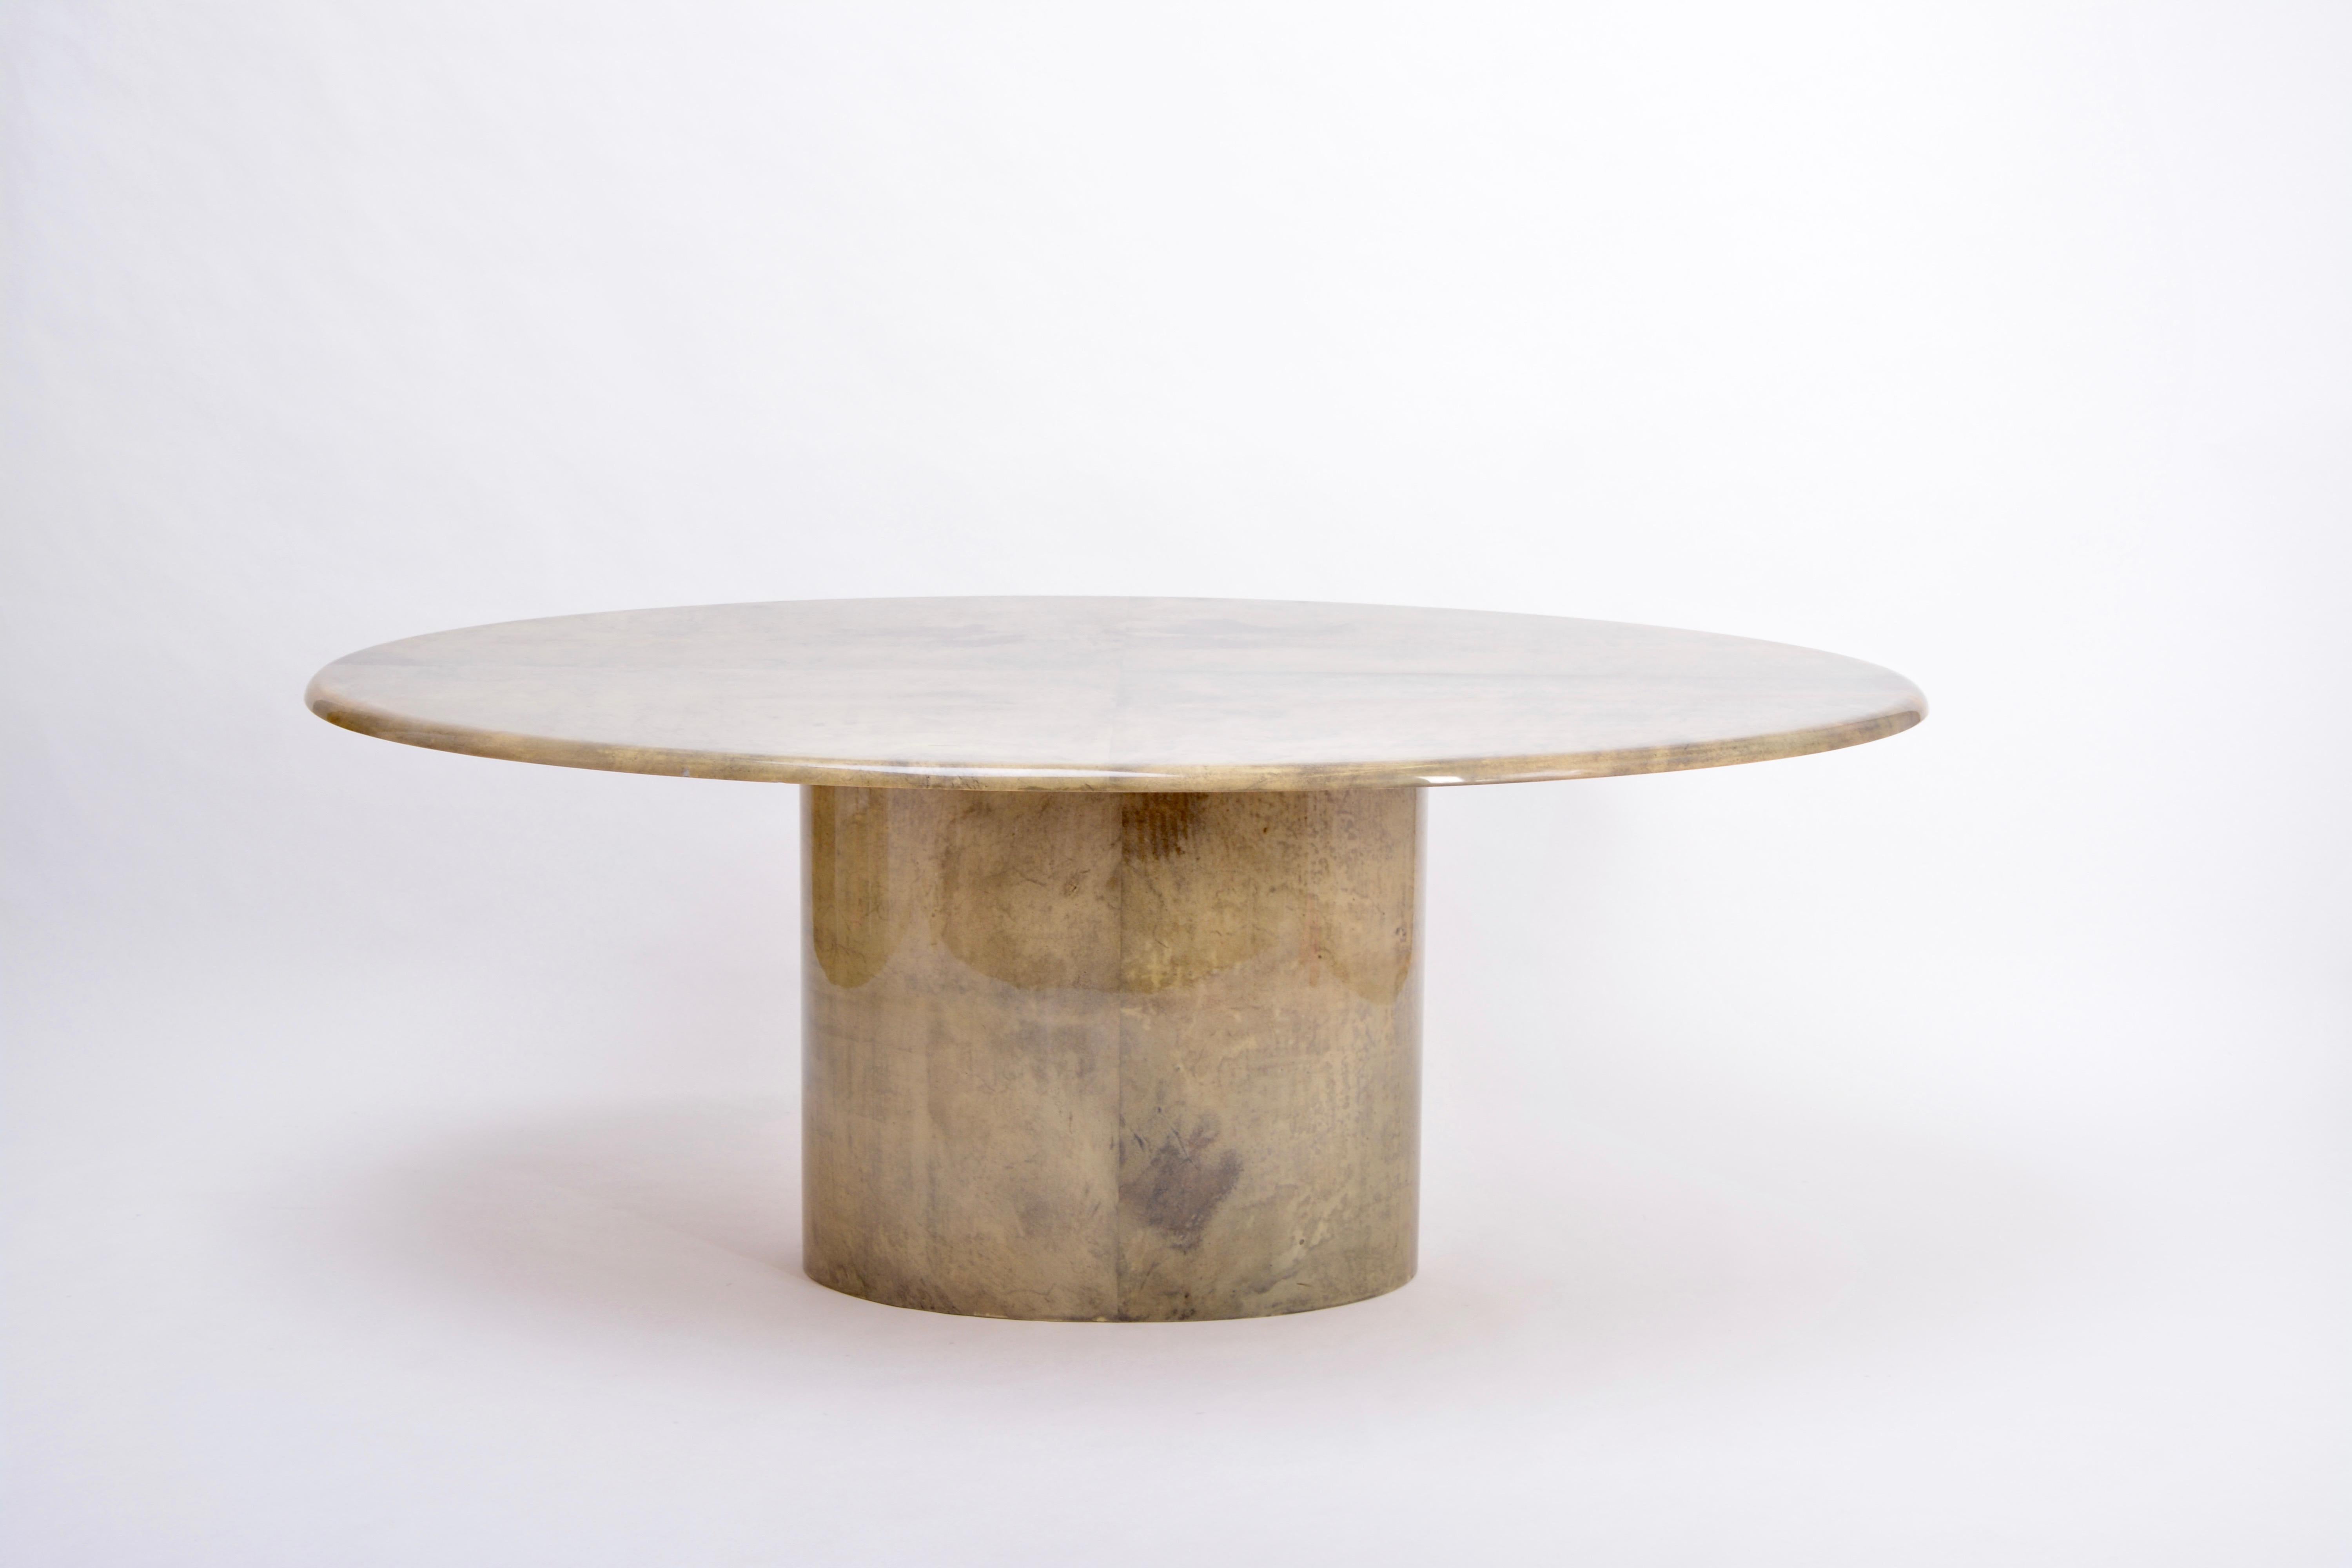 20th Century Aldo Tura Oval Dining Table in Lacquered Goatskin, Italy